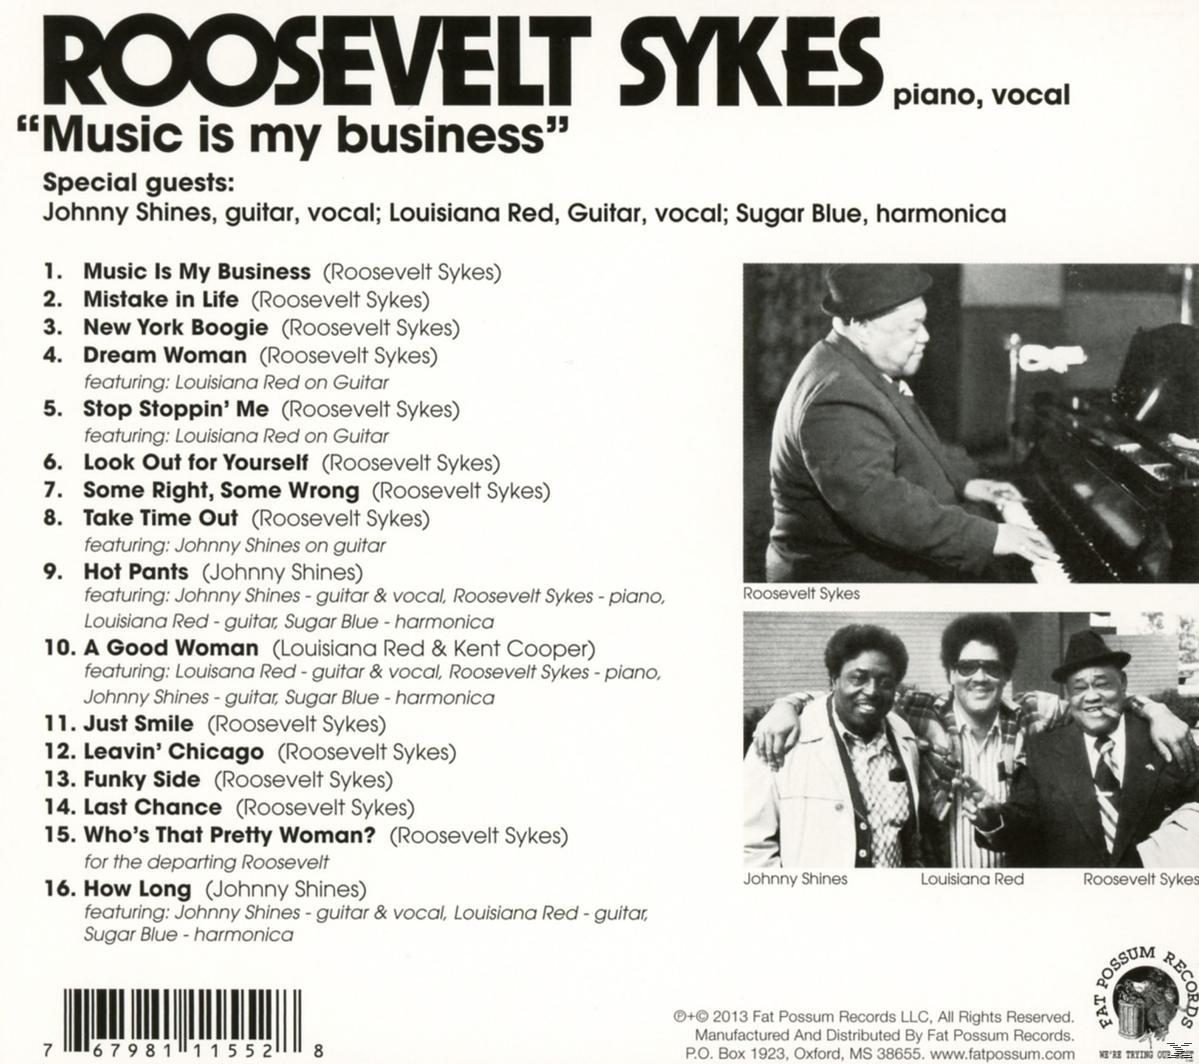 Roosevelt Business Sykes (CD) - Is - Music My